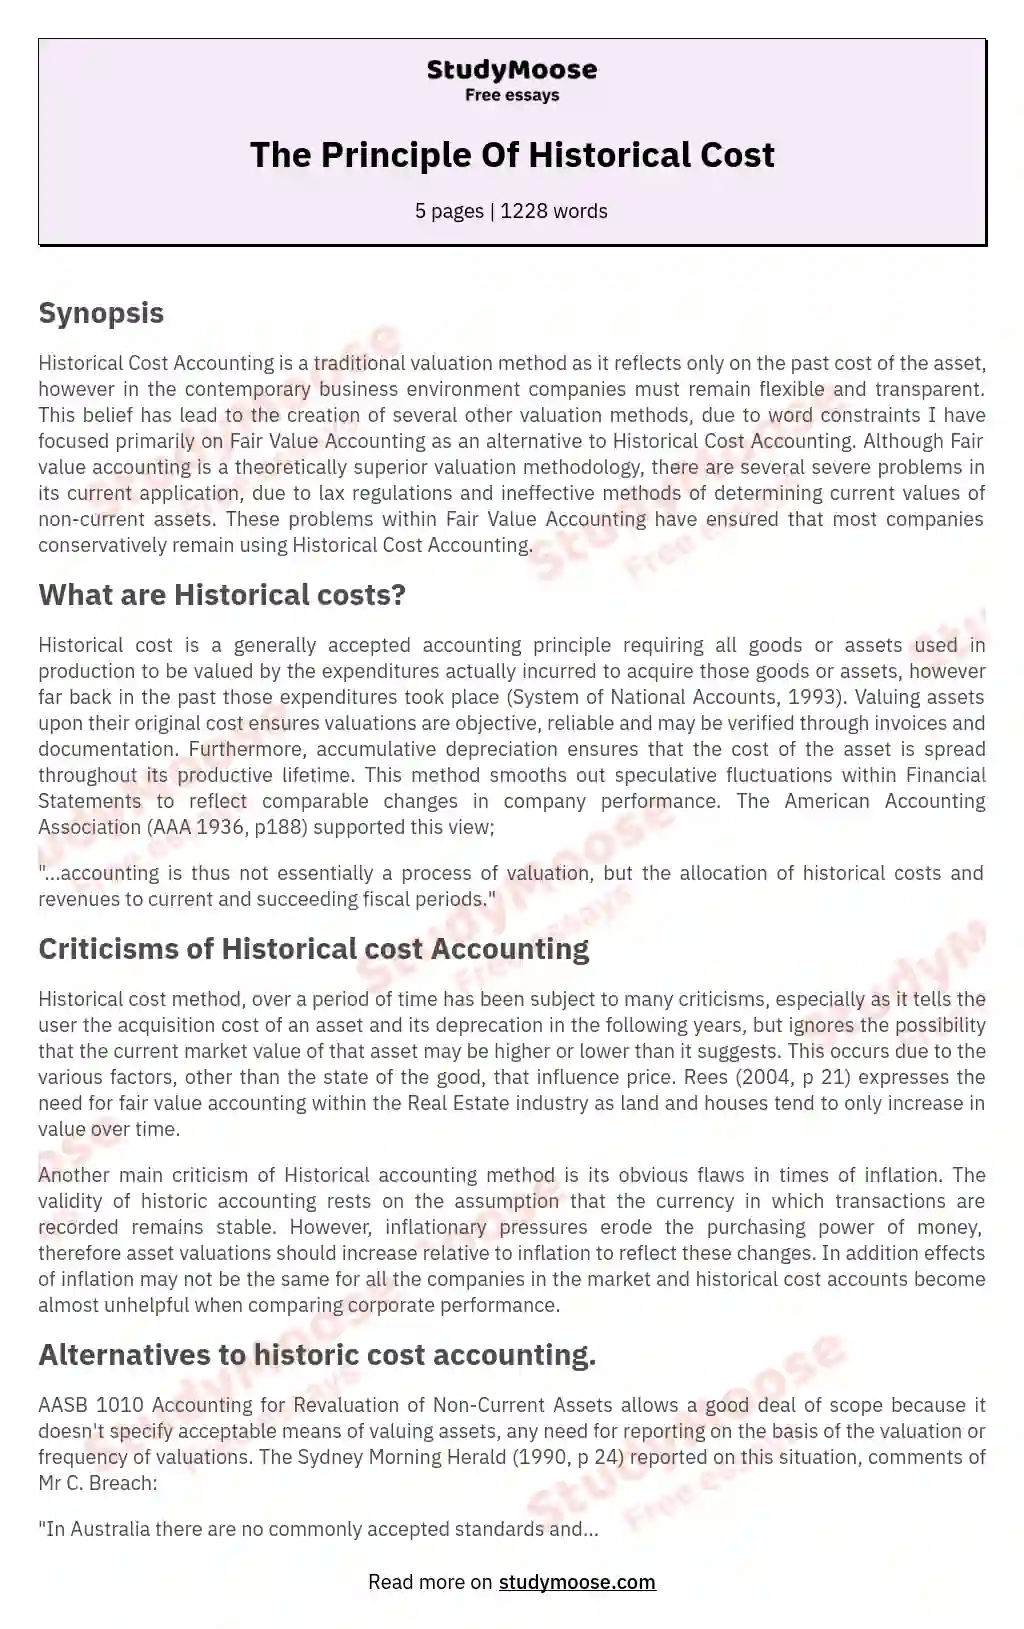 The Principle Of Historical Cost essay